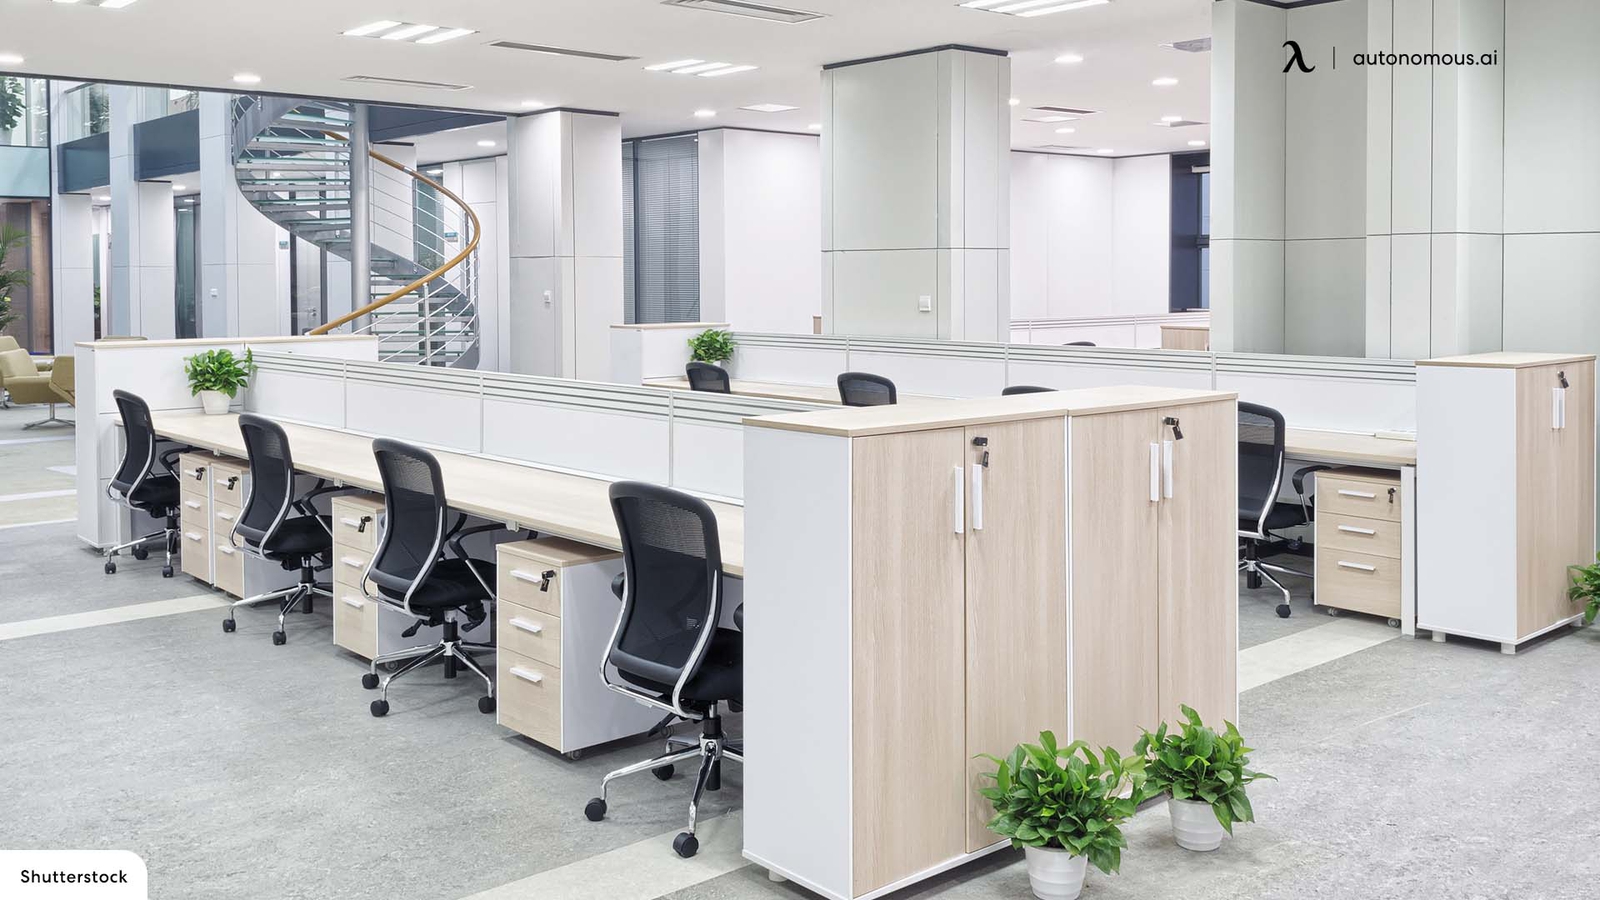 Where Can You Buy Bulk Office Furniture with a Minimal Budget?